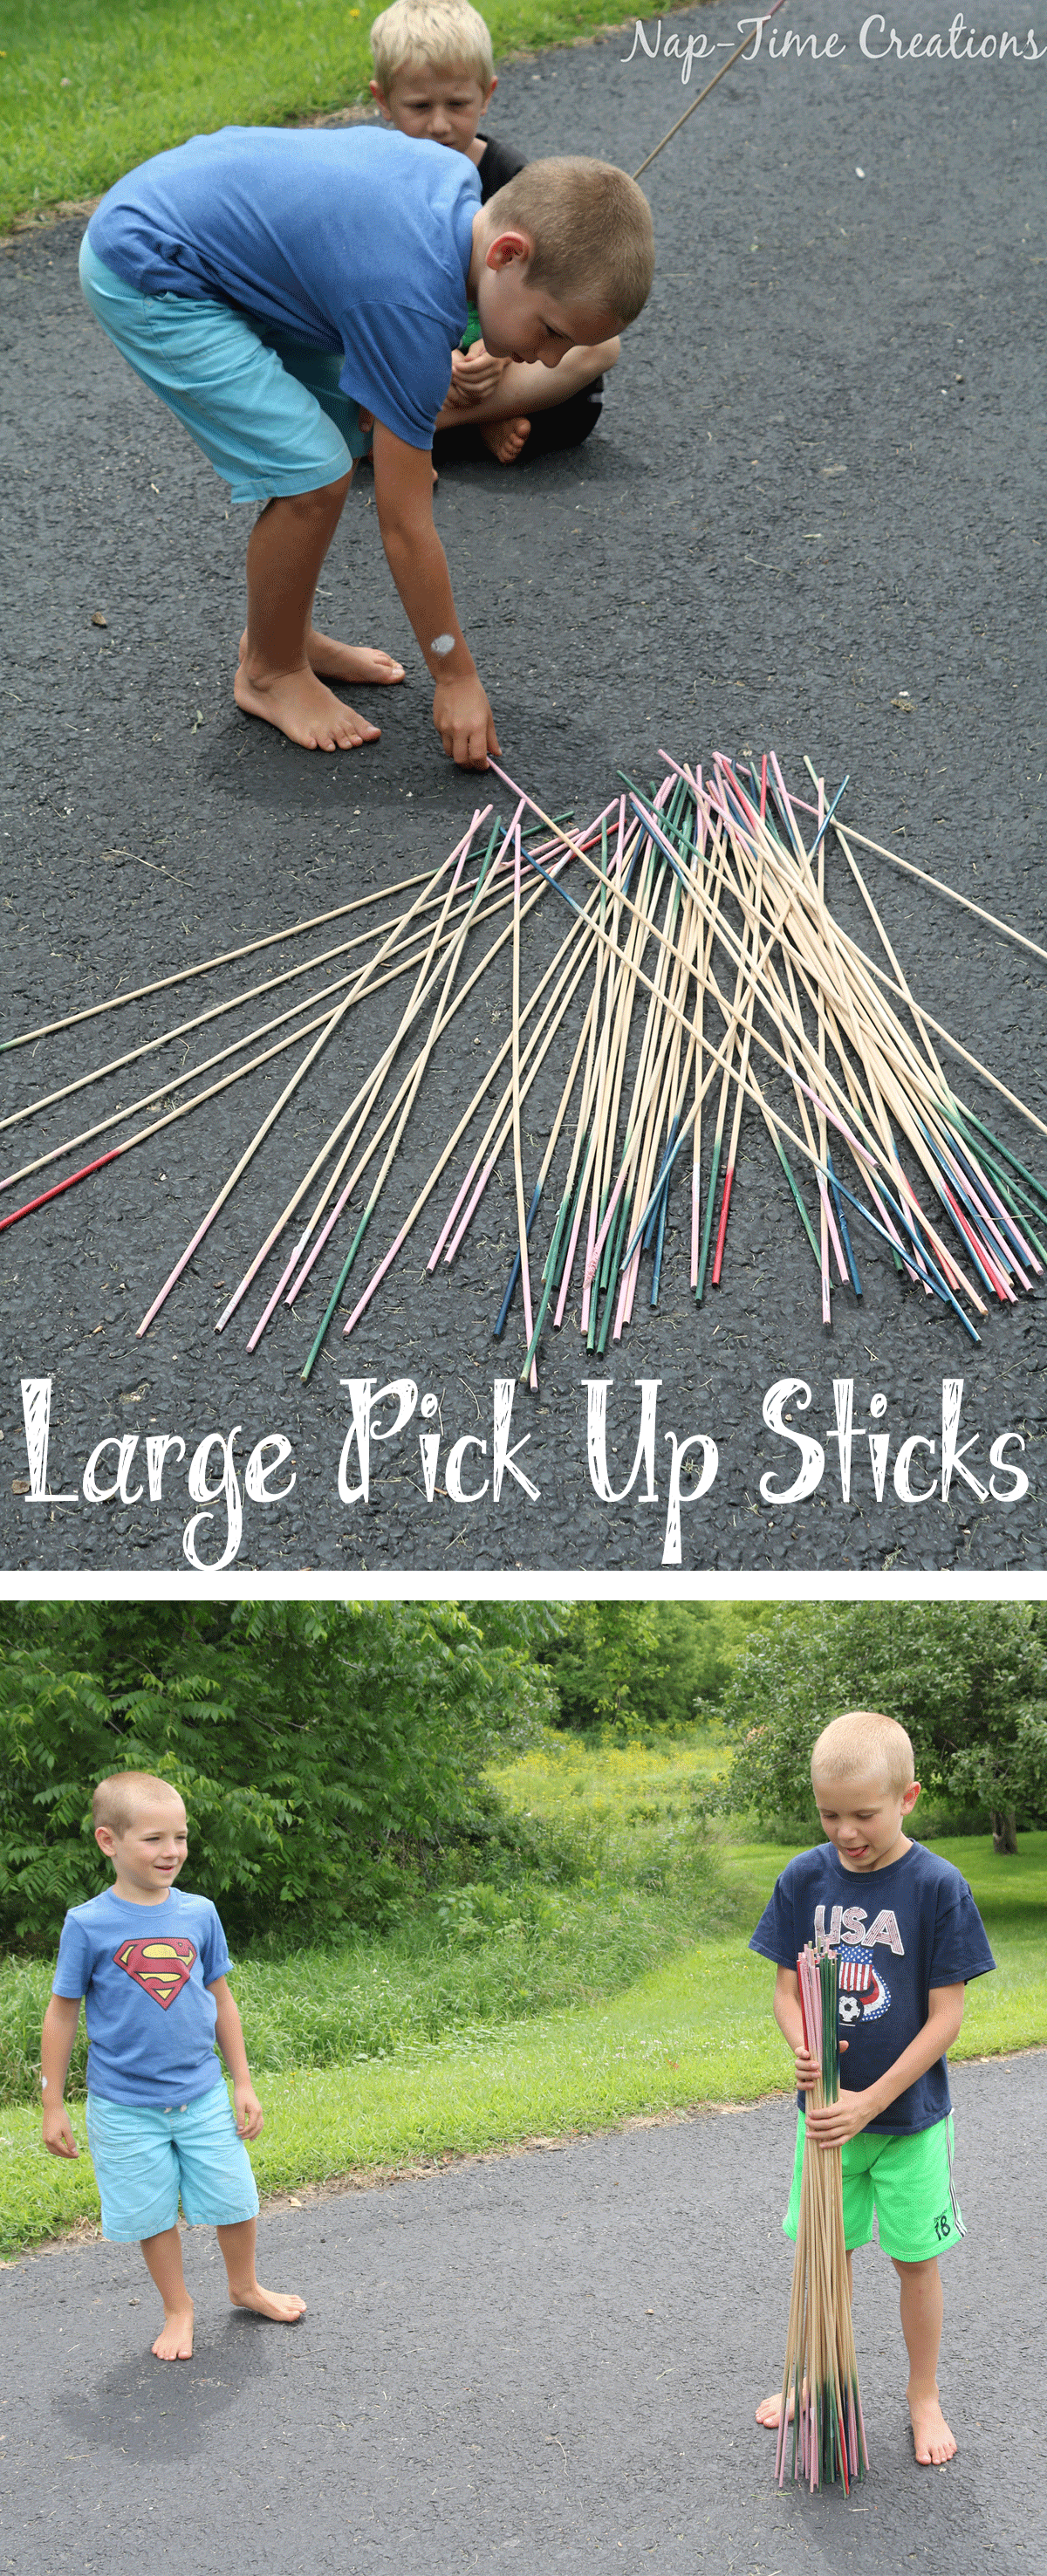 Large-Pick-Up-Sticks-summer-yard-game-by-Nap-Time-Creations